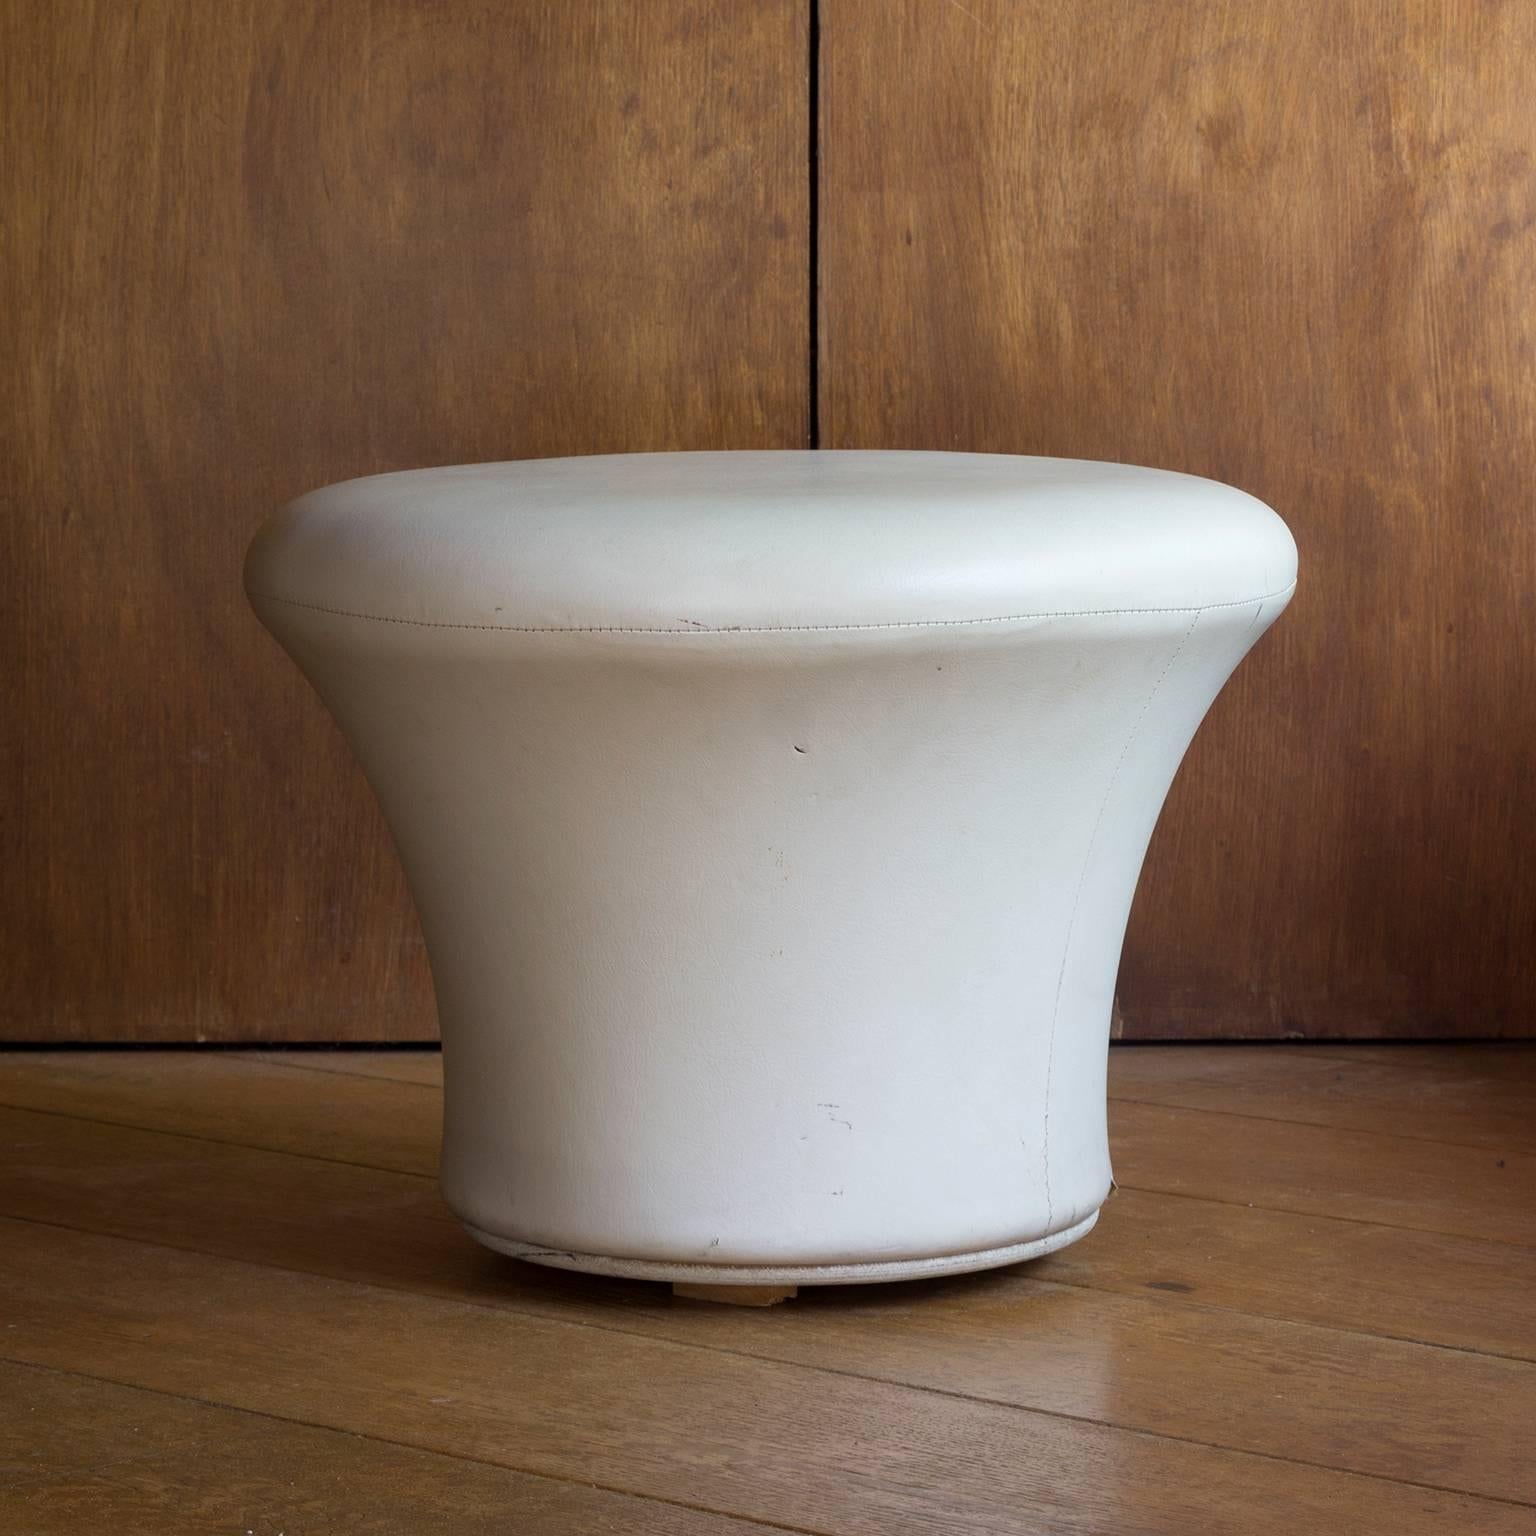 Original Crème or White Mushroom Stool. Has during the years some traces of wear like some spots and tiny raptures (see image 7 and 9)

Weight 4 kg

Diameter bottom 32 cm and top/seat 51 cm